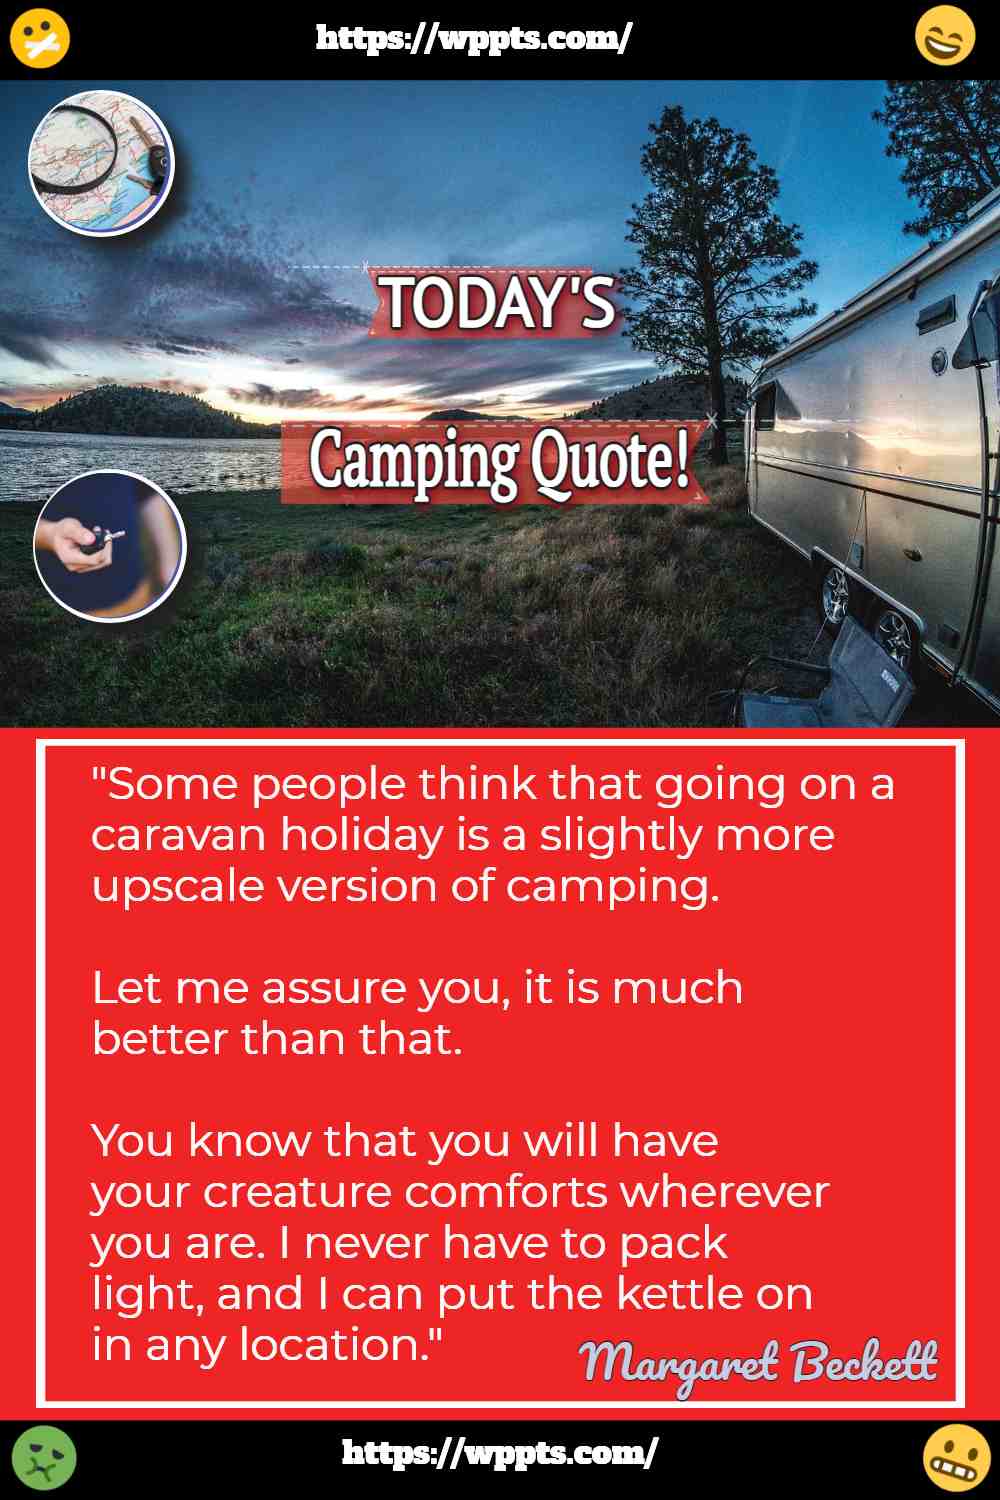 Image shows today's camping quote.